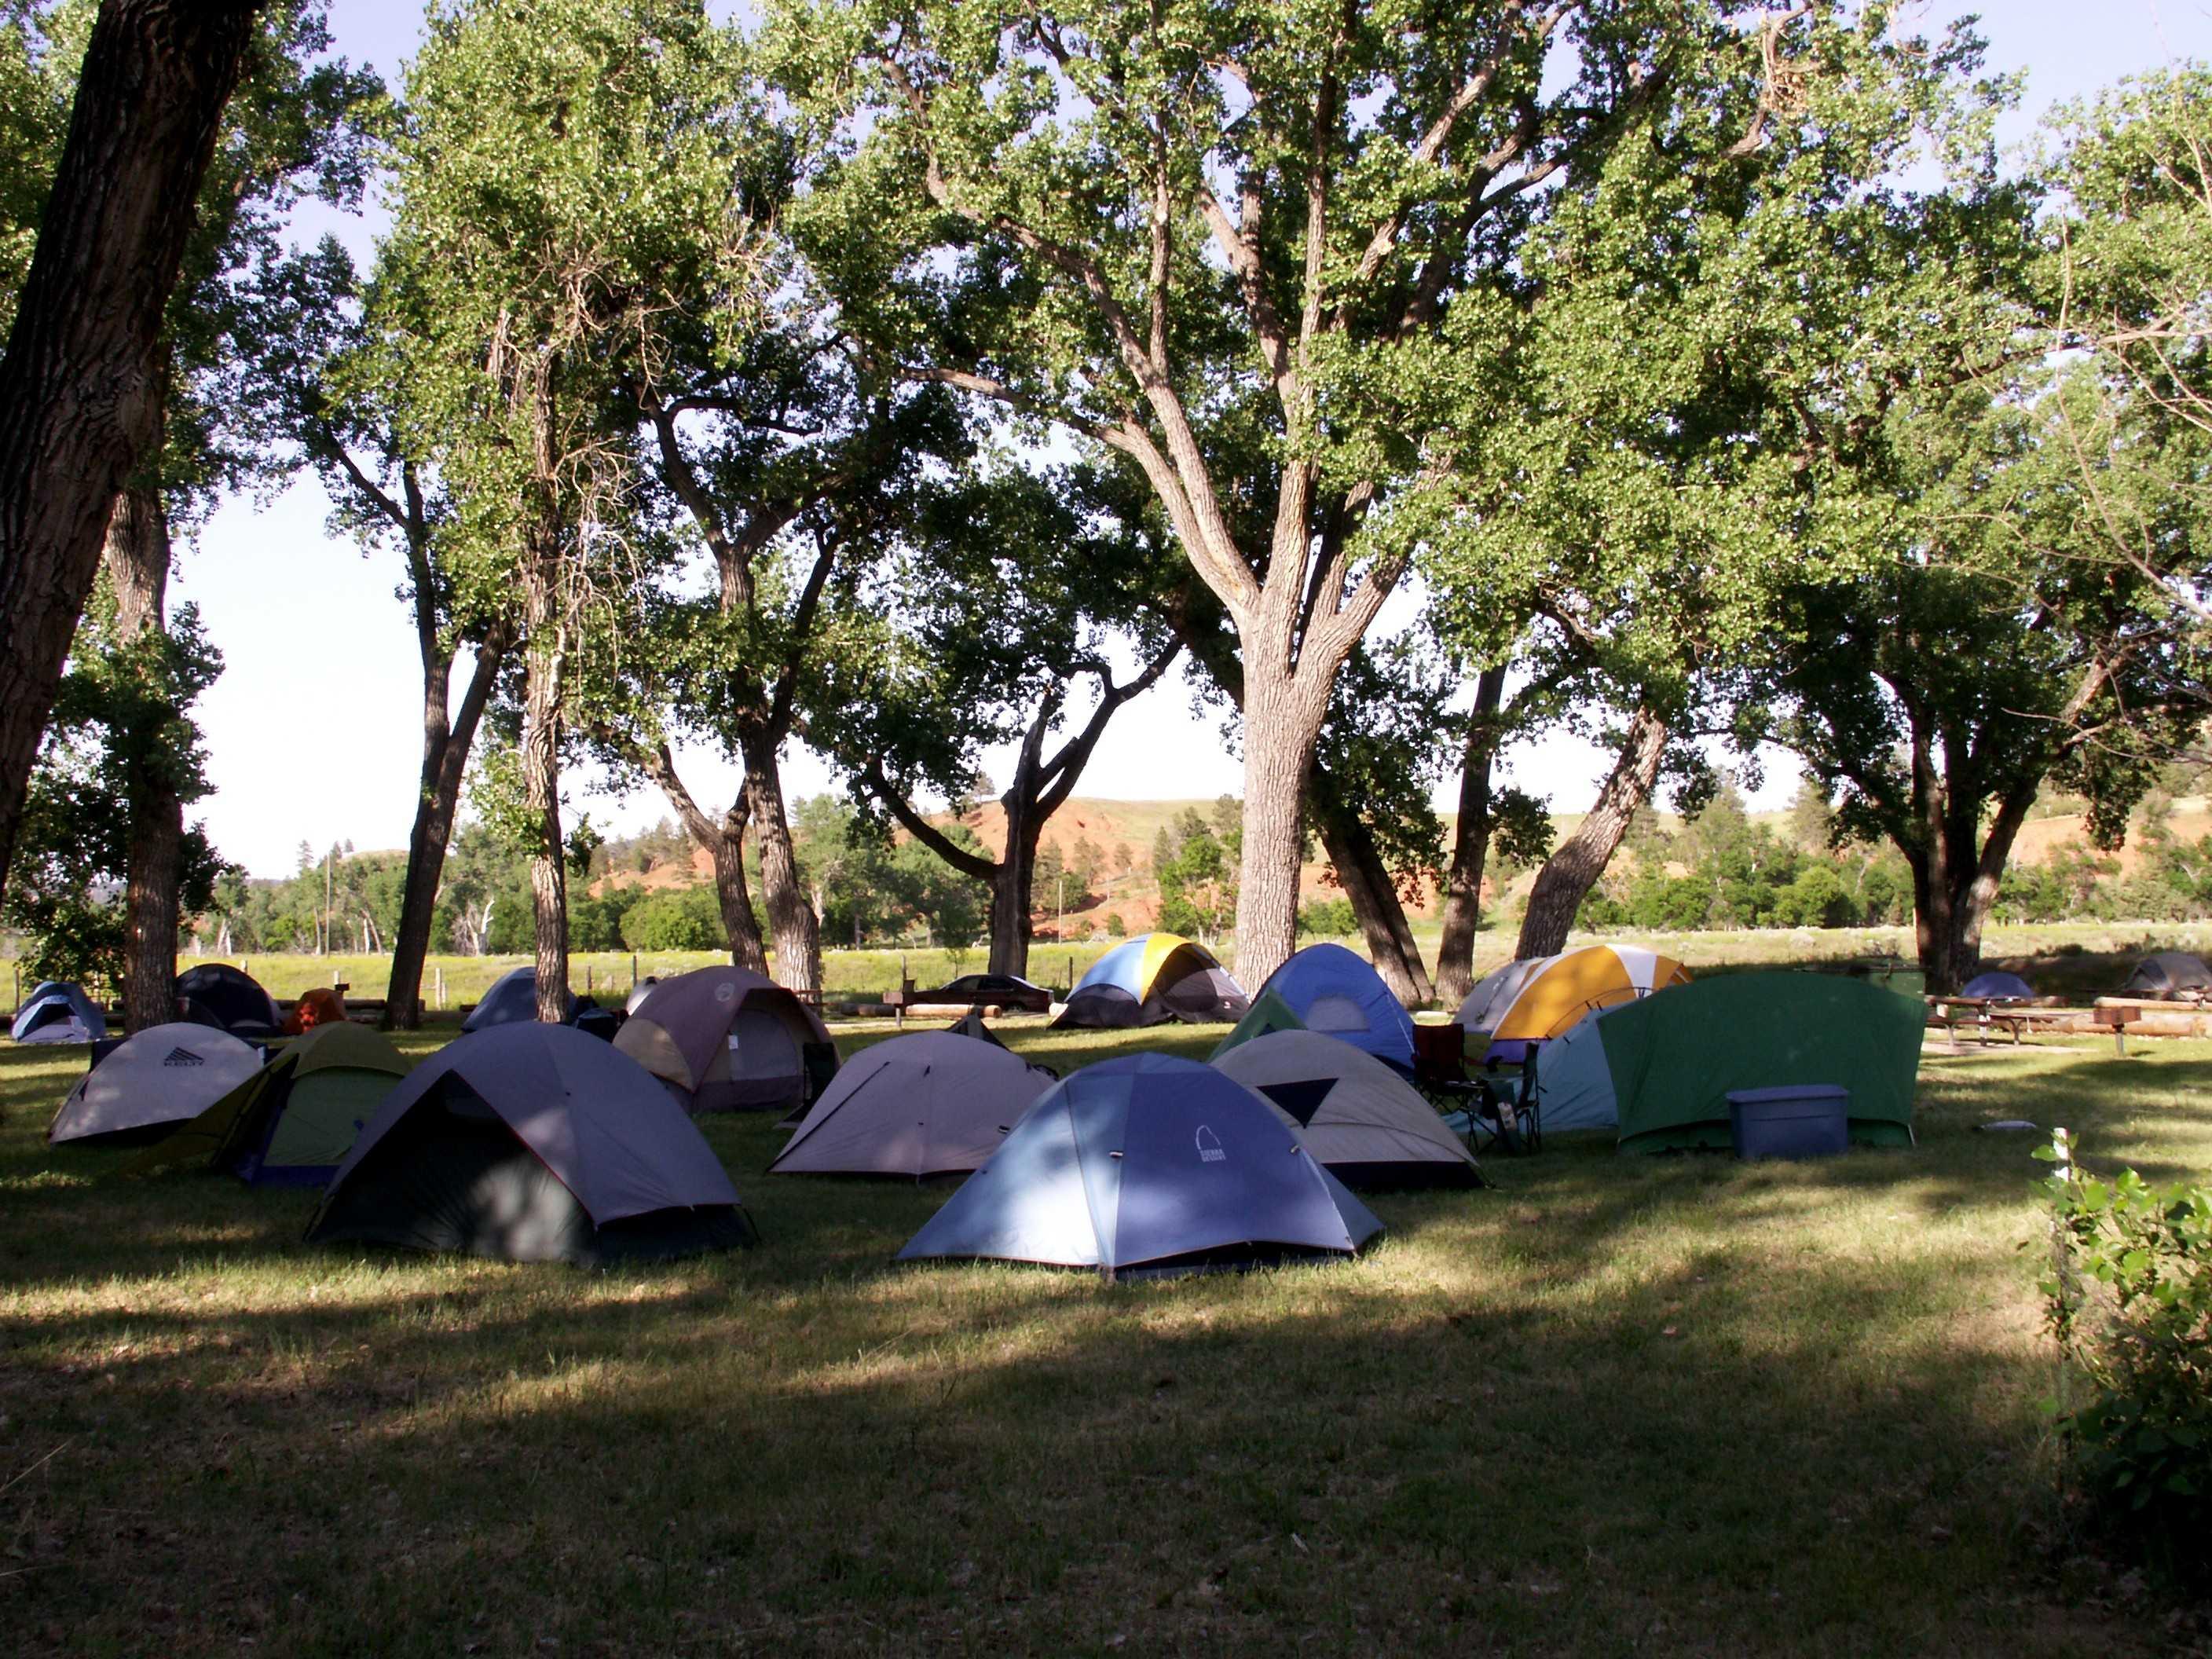 Several tents set up in a group site